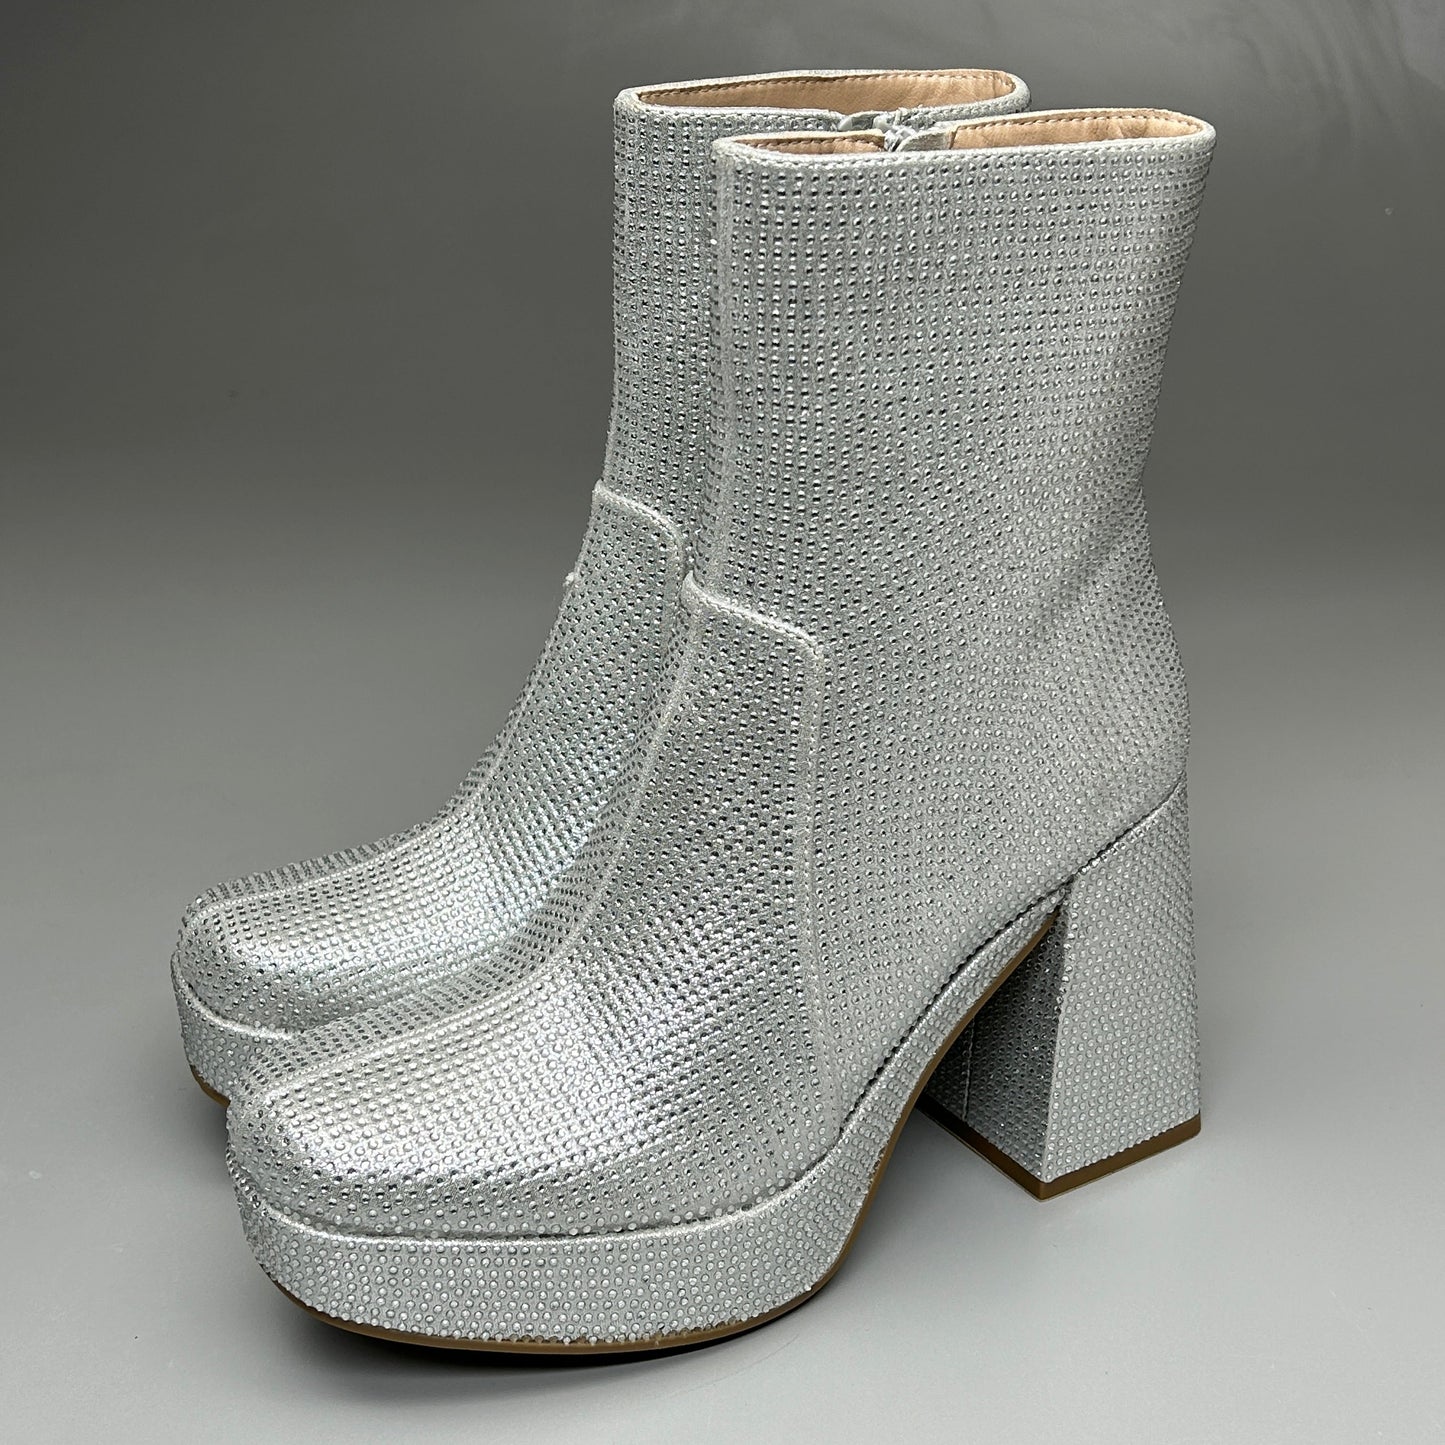 ZA@ MIA Case of 12! Iva Silver Stone Heeled Boots VARIOUS SIZES (New) A6